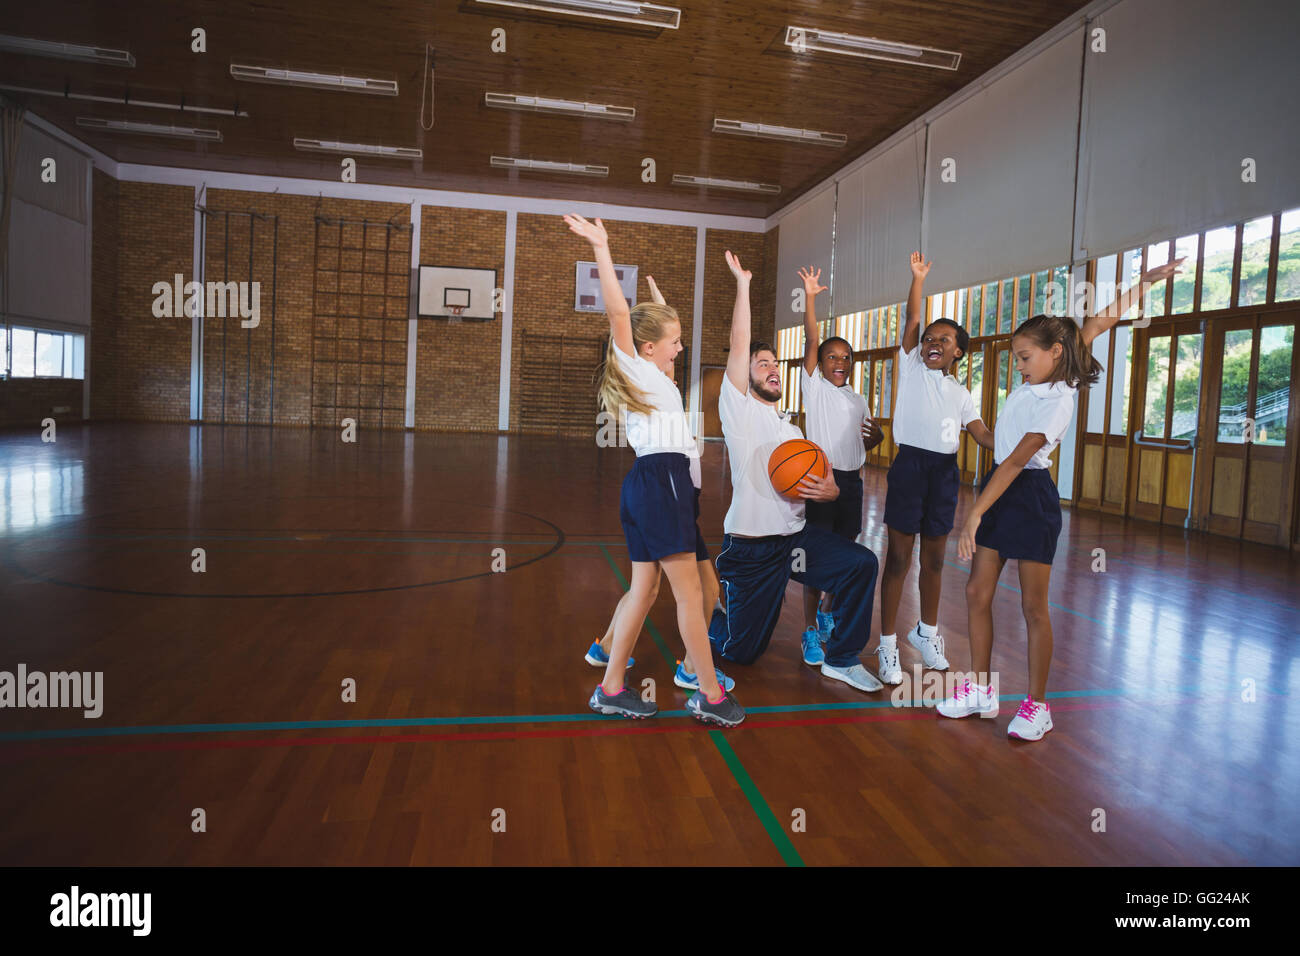 Sports teacher and school kids playing in basketball court Stock Photo